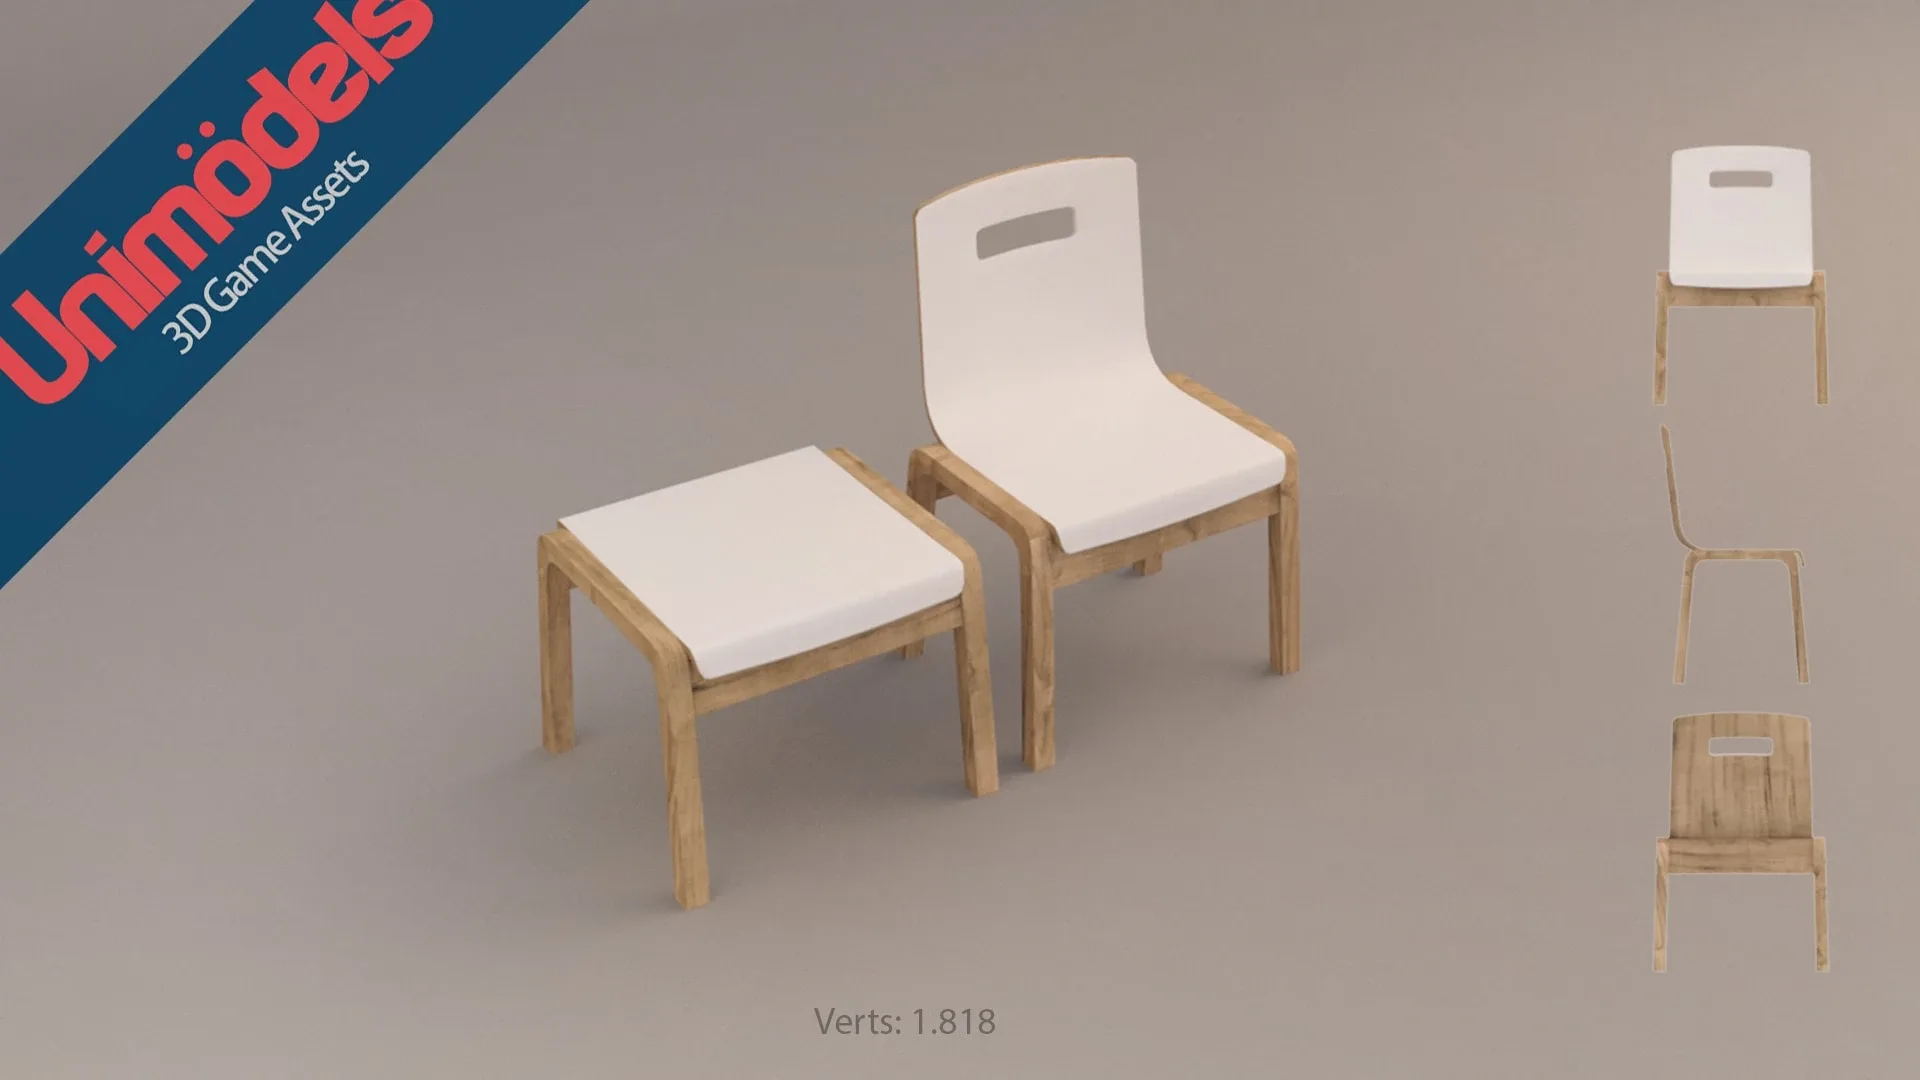 Unimodels Chairs & Tables Vol. 2 for Unity